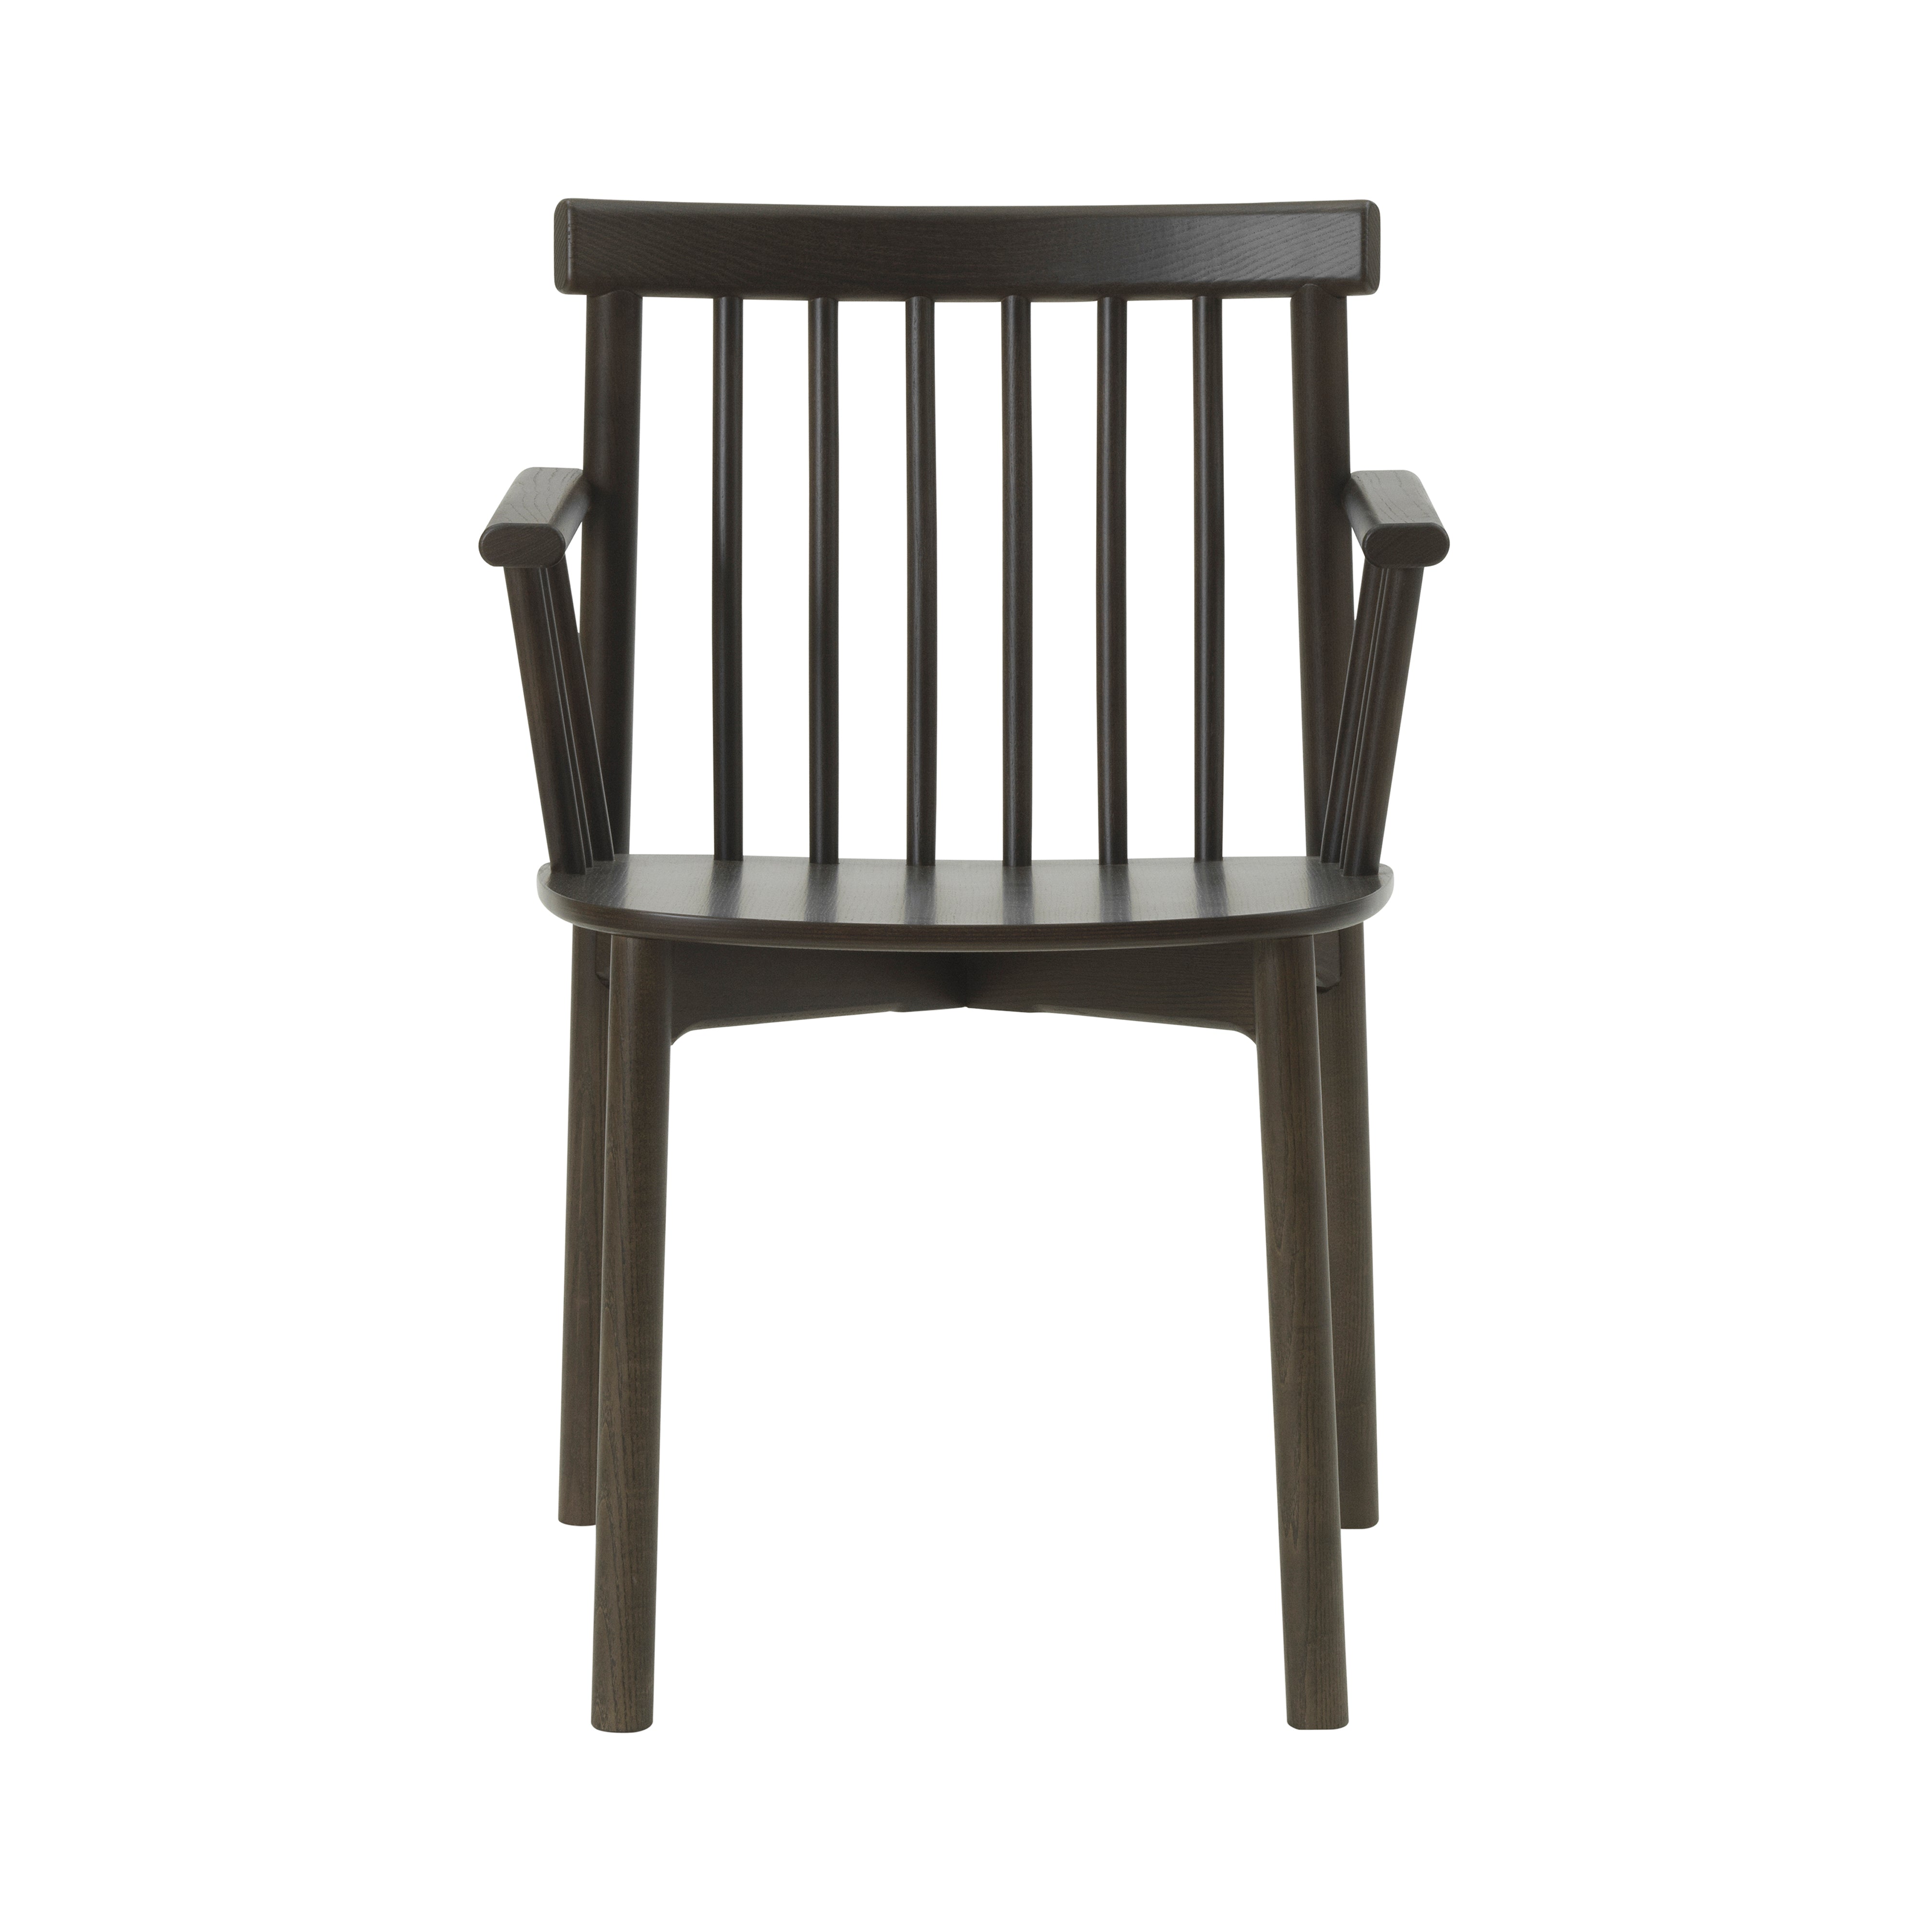 Pind Chair: With Arm + Brown Stained Ash